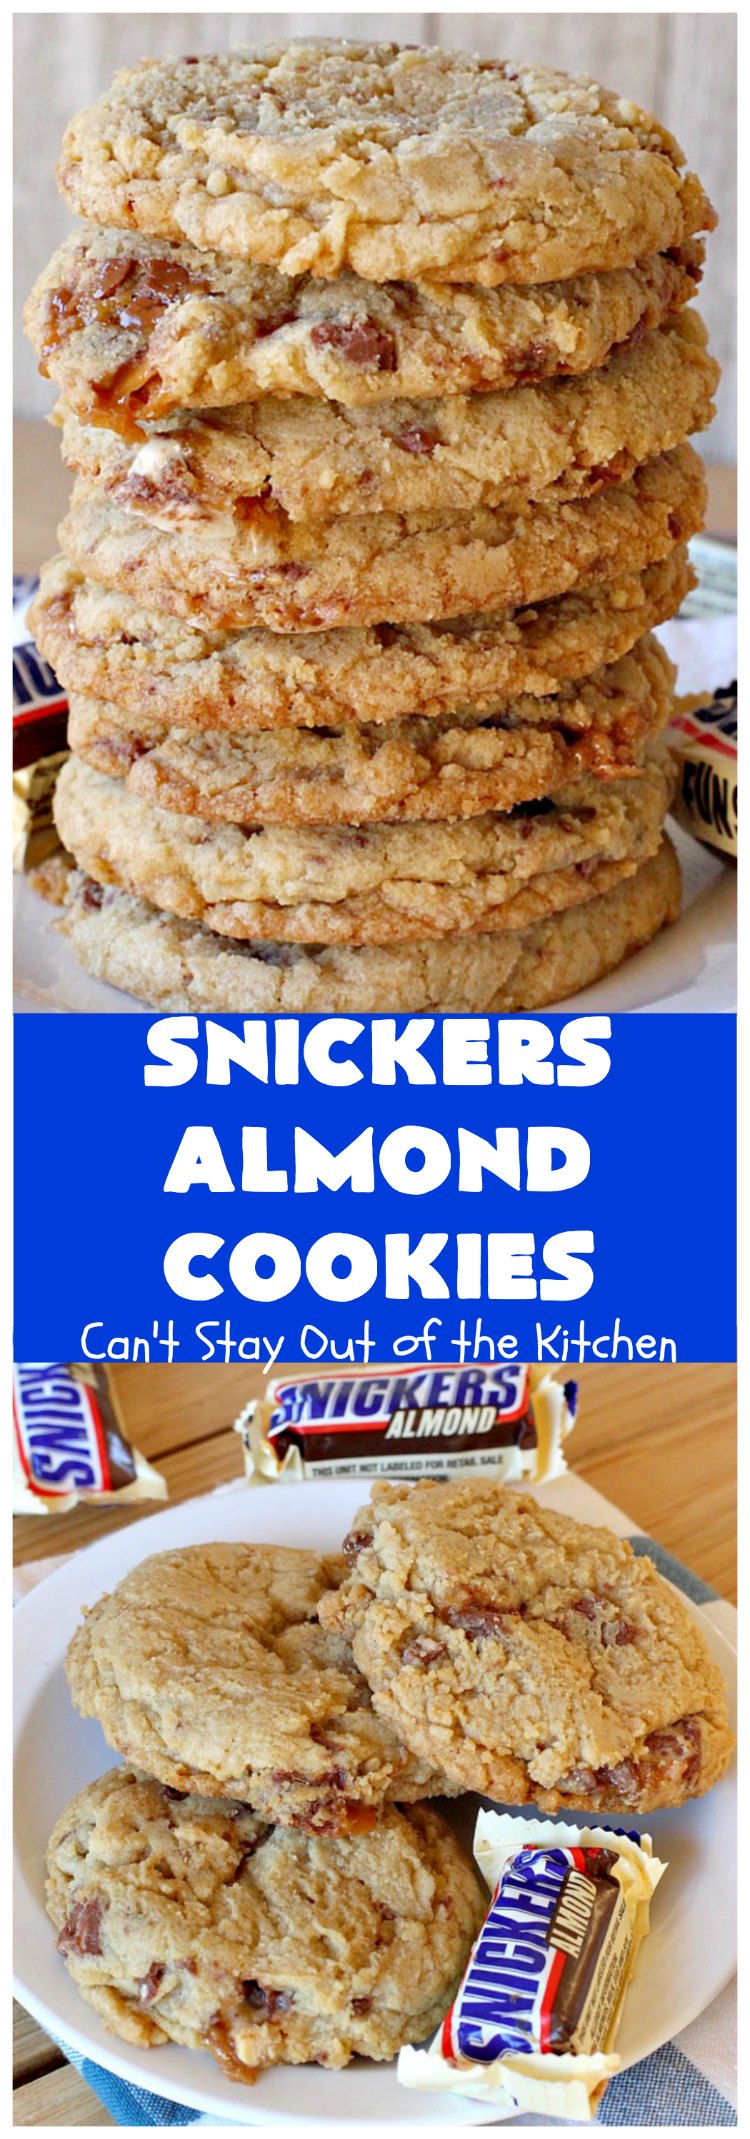 Snickers Almond Cookies | Can't Stay Out of the Kitchen | these scrumptious #cookies will cure any sweet tooth craving. This #dessert uses #SnickersAlmondBars in the dough. So they're filled with #chocolate & #almonds. Every bite will have you salivating. #tailgating #holiday #baking #HolidayBaking #HolidayDessert #SnickersDessert #ChocolateDessert #AlmondDessert #ChristmasCookieExchange #Snickers #SnickersBars #SnickersAlmondCookies